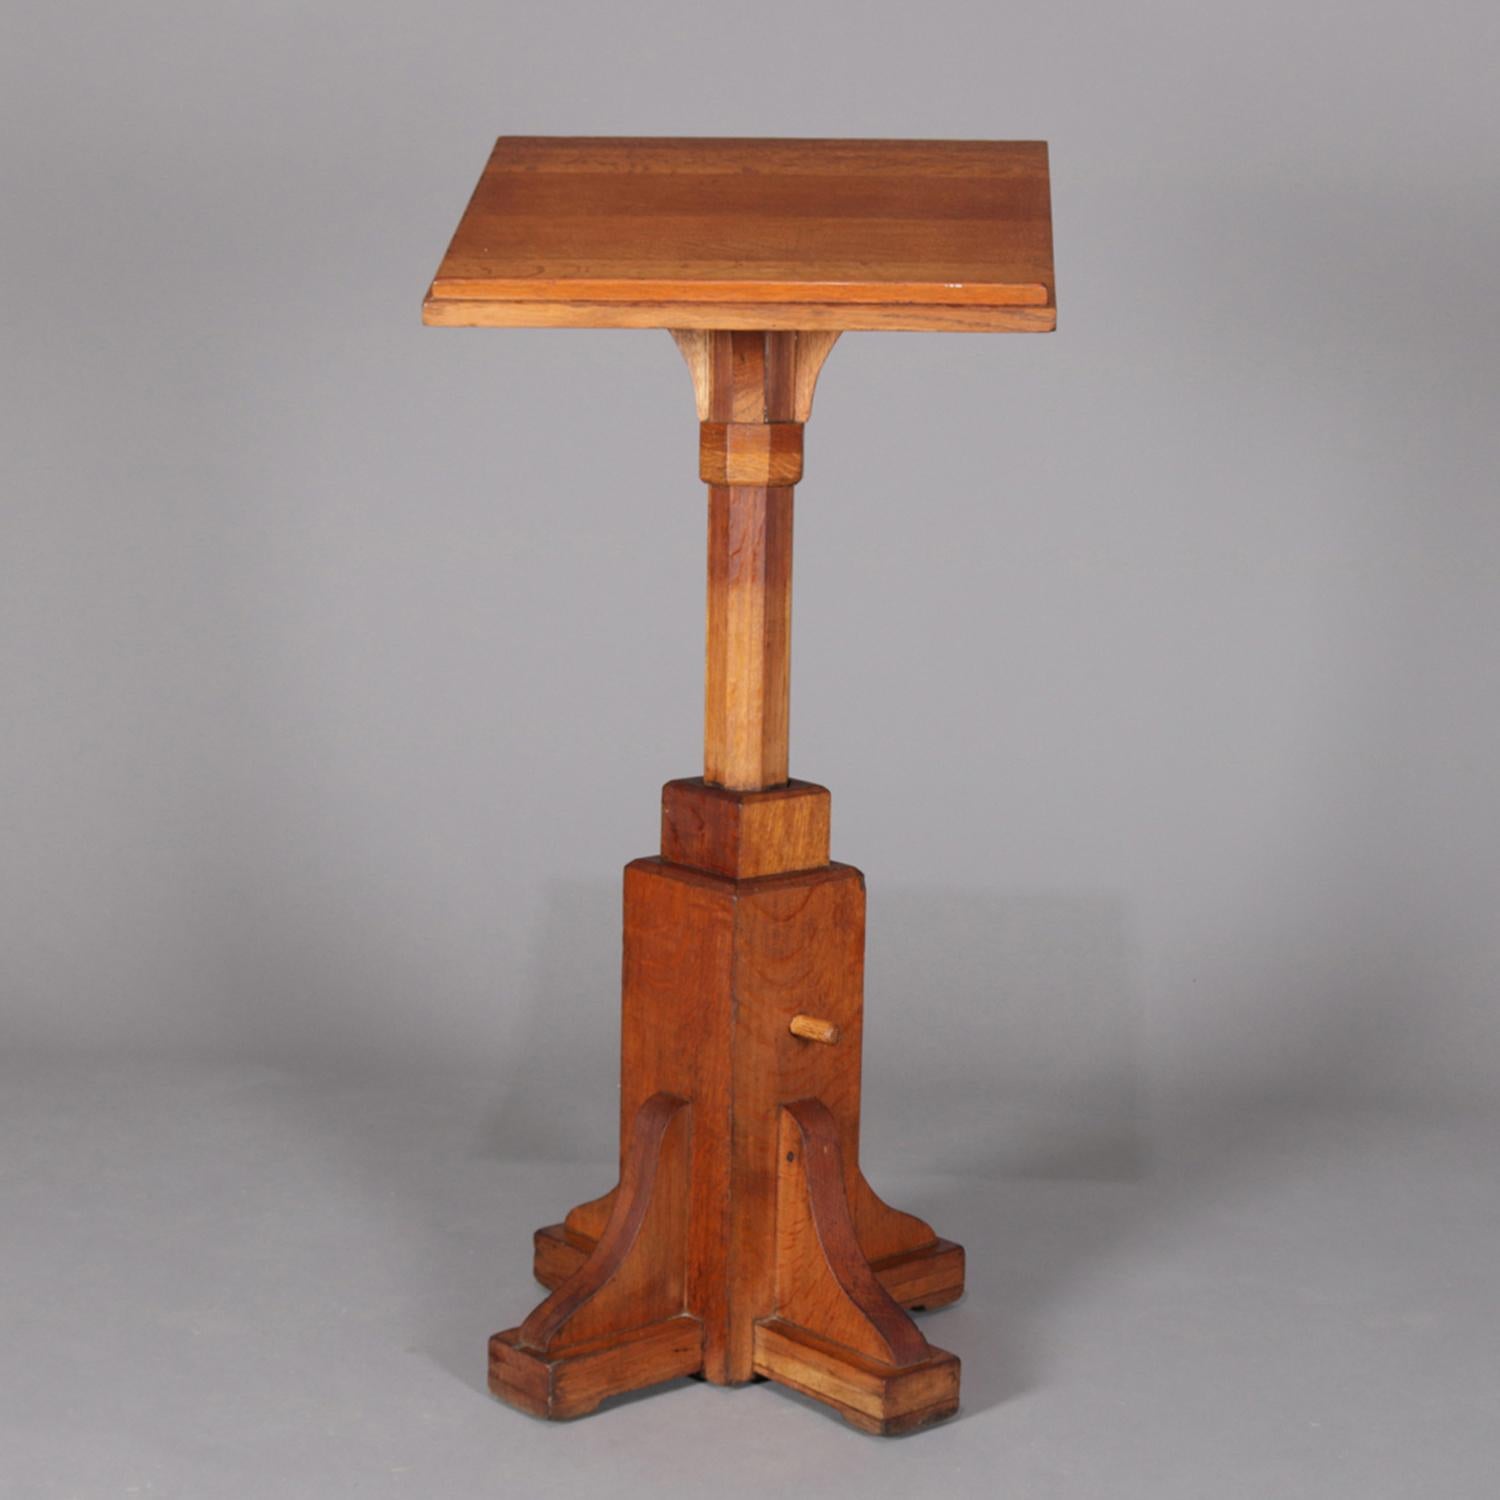 An antique Arts & Crafts Mission oak pulpit lectern features stepped base with four legs and peg-adjusted height, circa 1910.

Measures: 38.5